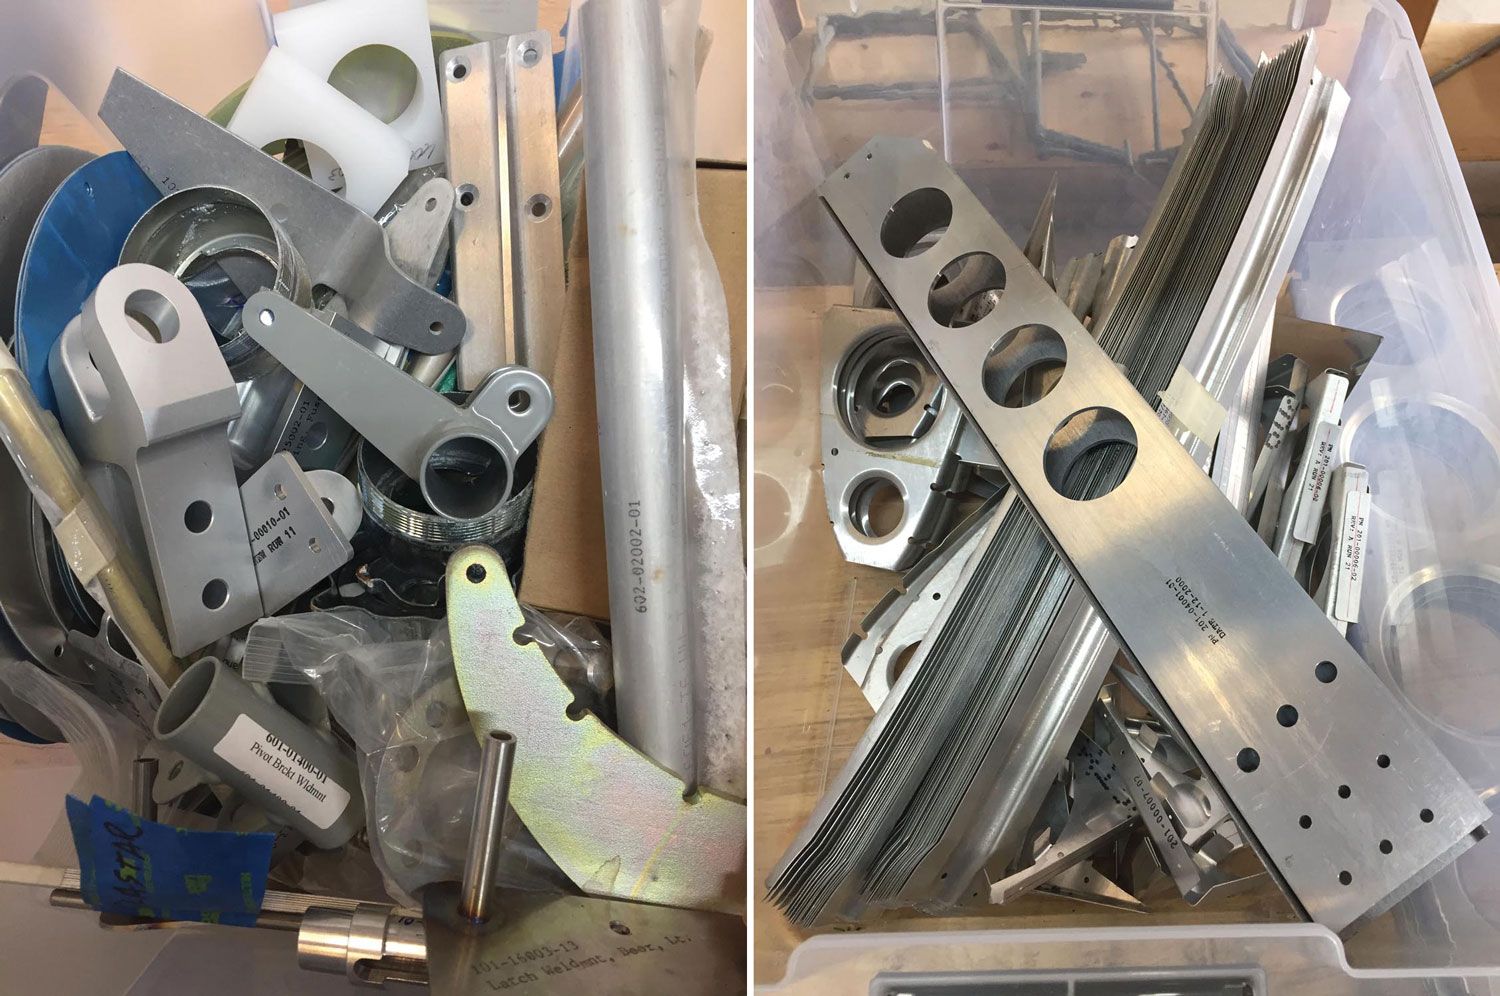 (Left) Parts to reorganize. There are always more than you think there will be. (Right) Organization by task—in this case parts for the right wing in a clear plastic tub are easy to find when the assembly manual calls for them.